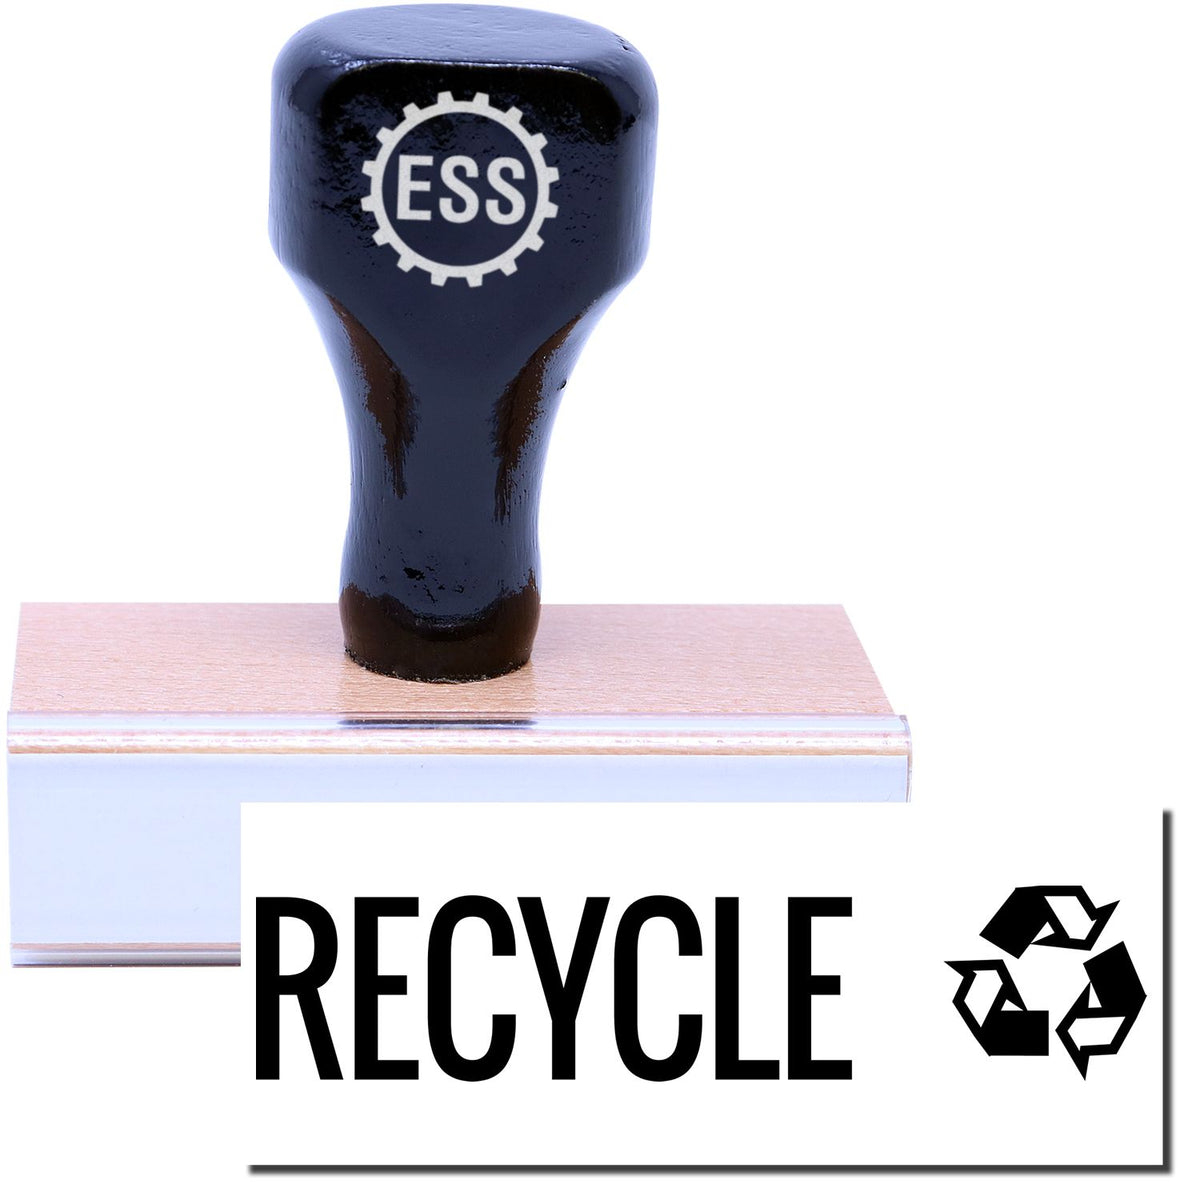 A stock office rubber stamp with a stamped image showing how the text &quot;RECYCLE&quot; with the recycling icon on the right side is displayed after stamping.